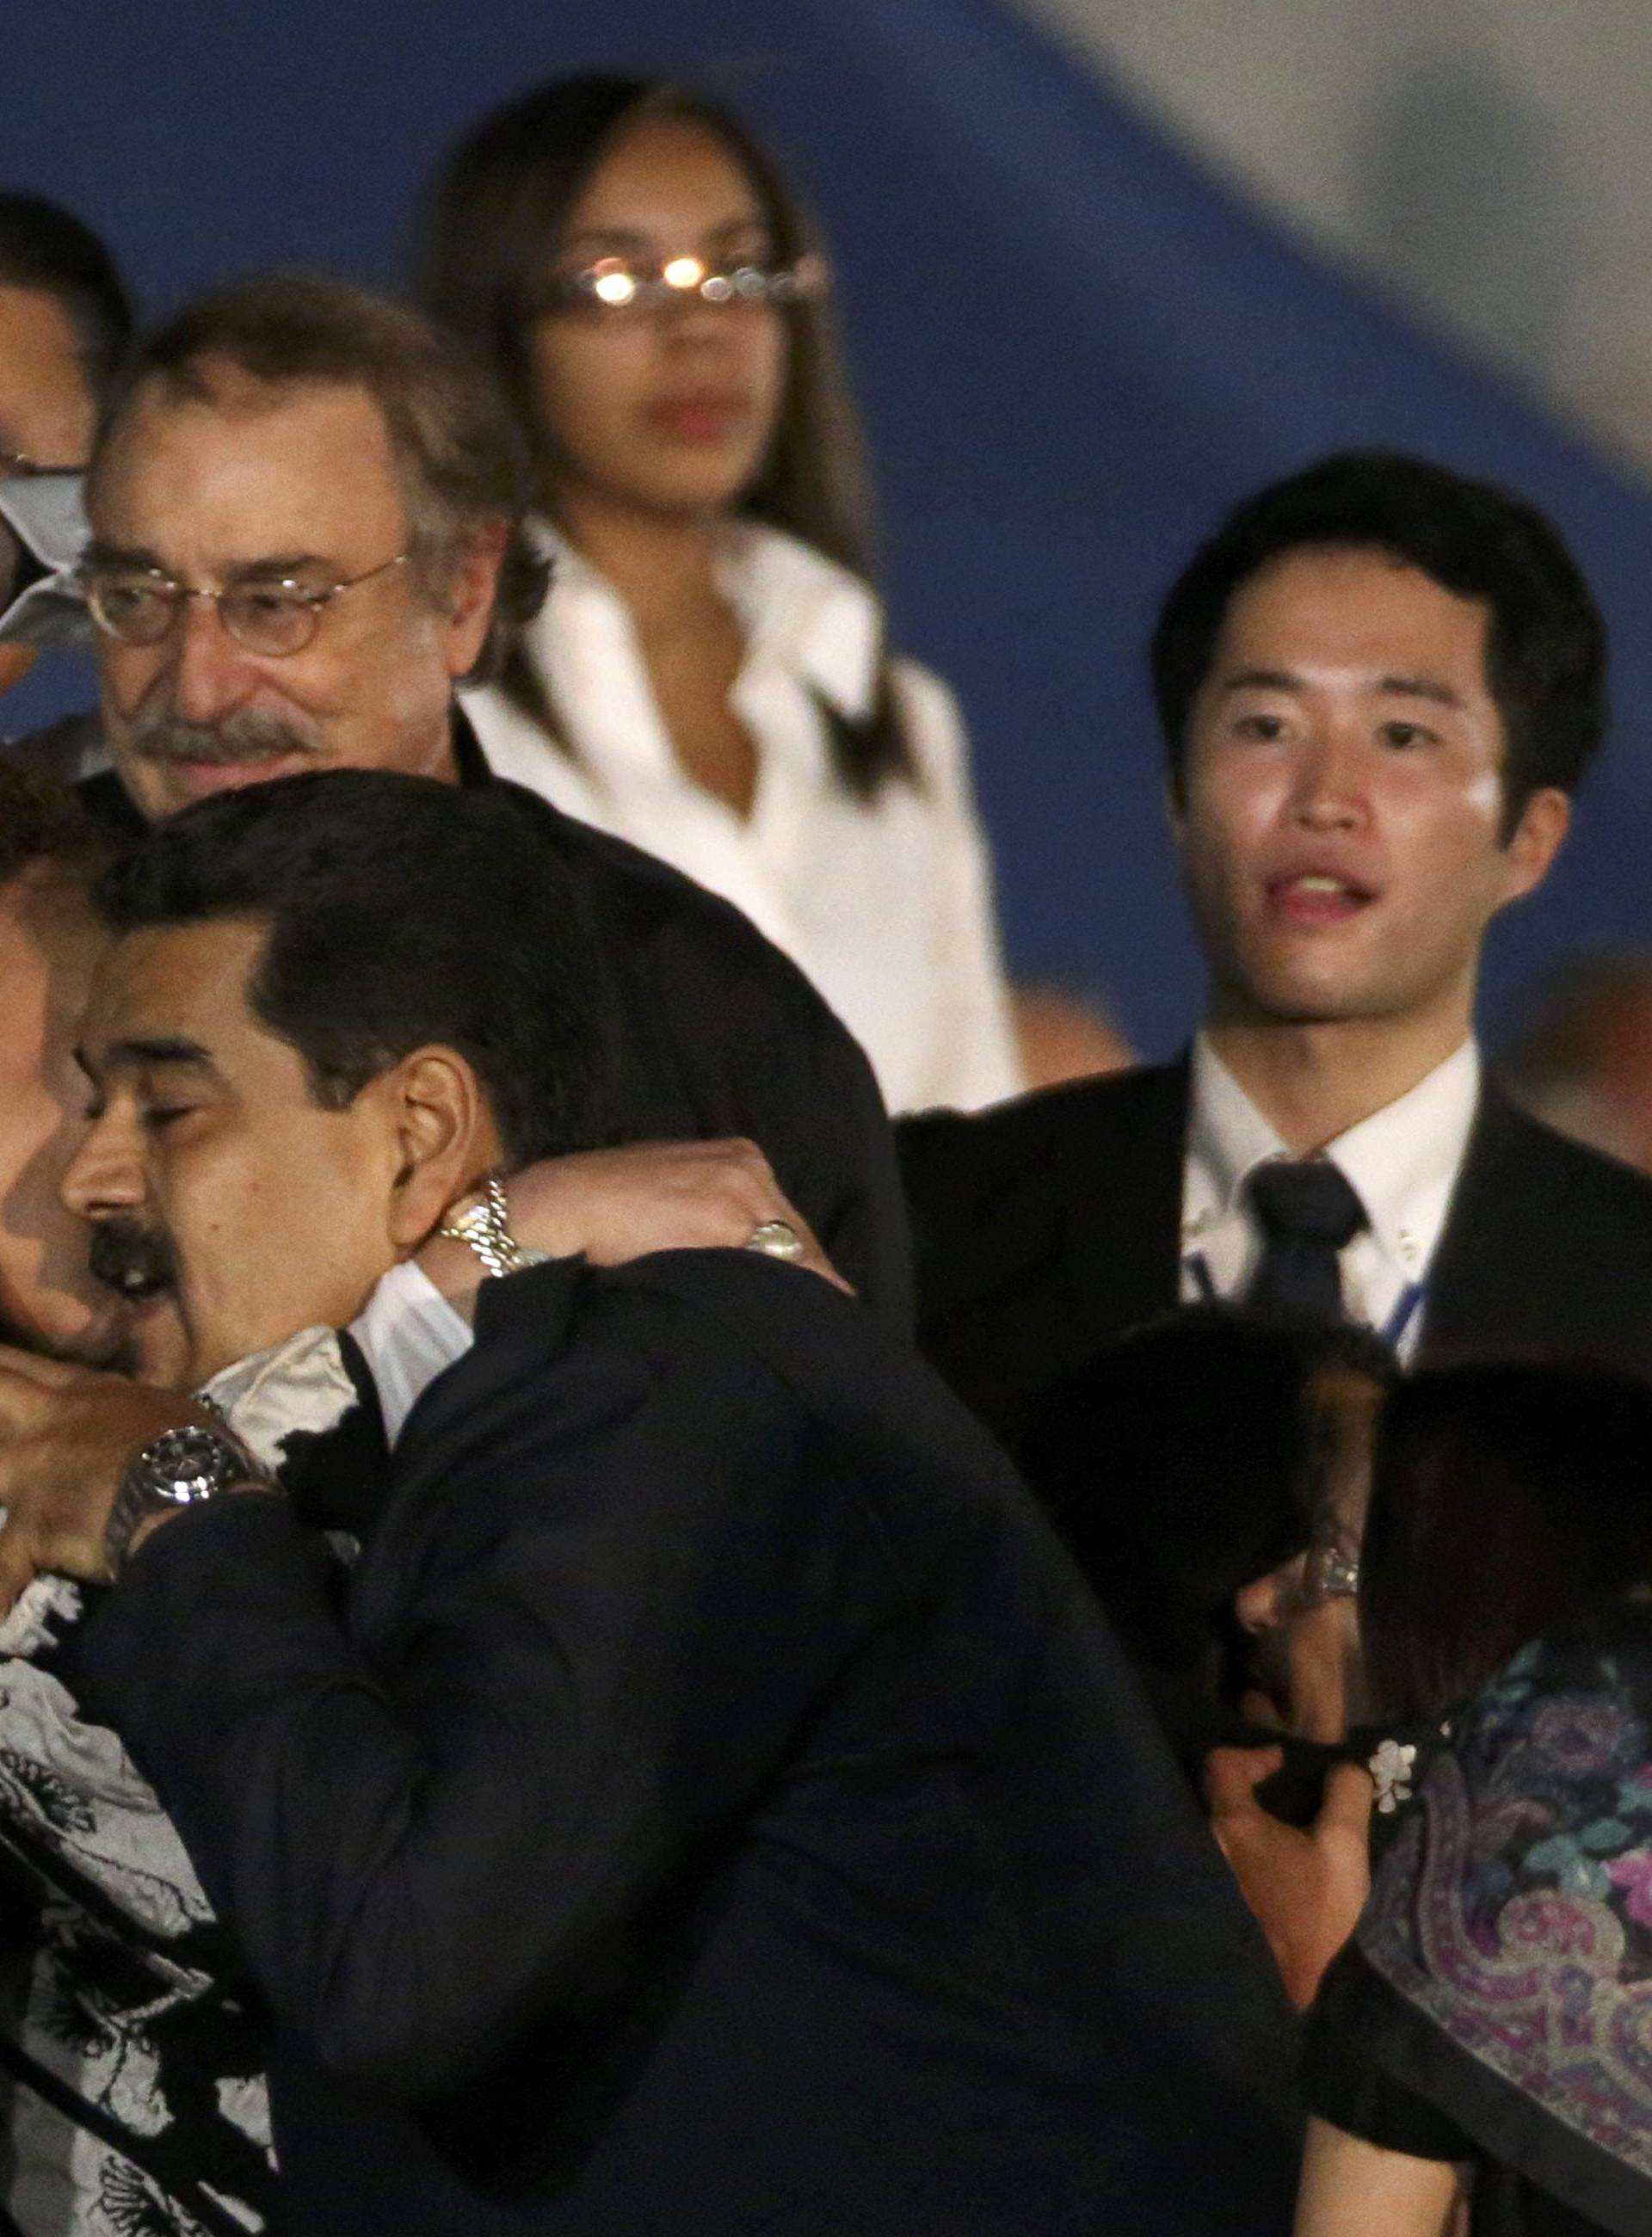 Colombia's former Senator Cordoba and Venezuelan President Maduro embrace as they attend a massive evening tribute to Cuba's late President Castro in Havana